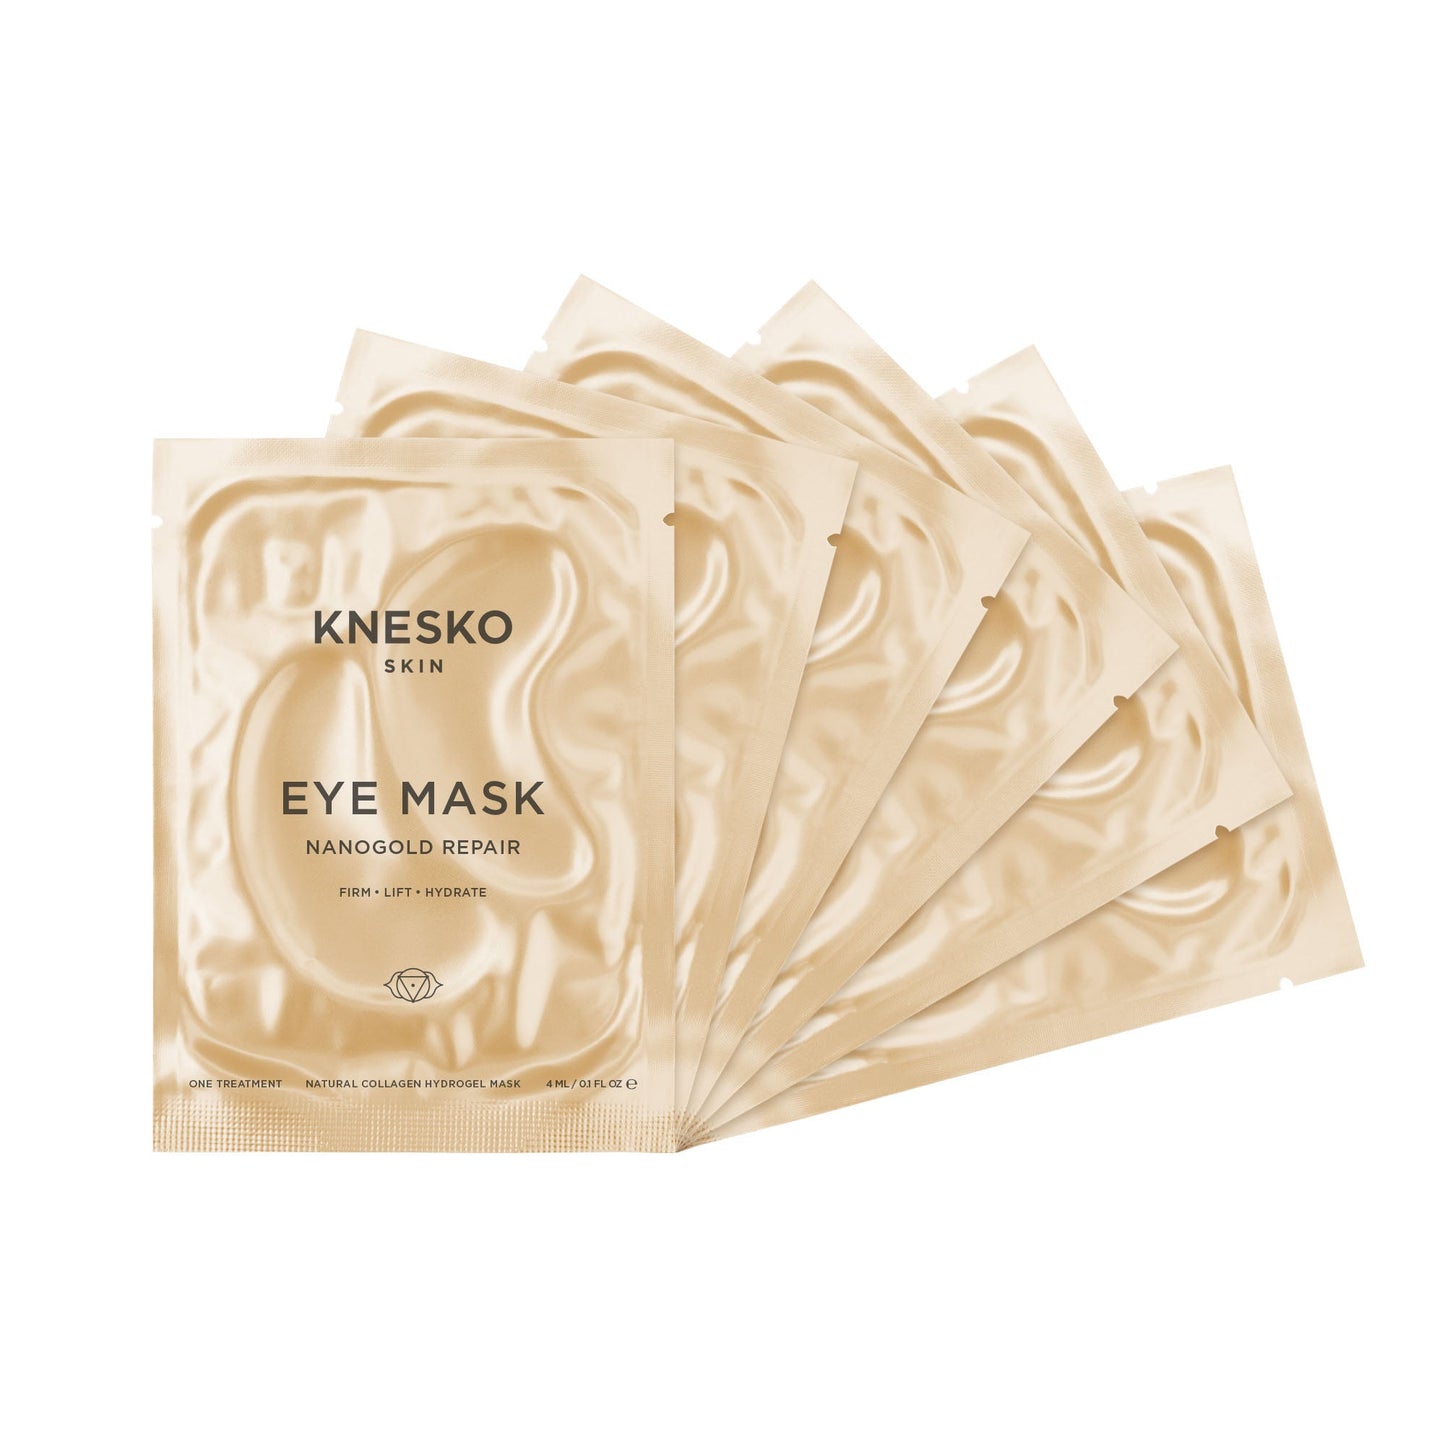 Buy Online Best Nanogold Eye Mask - 6 Treatments | Buy innovative clinical skincare products - TOPBODY